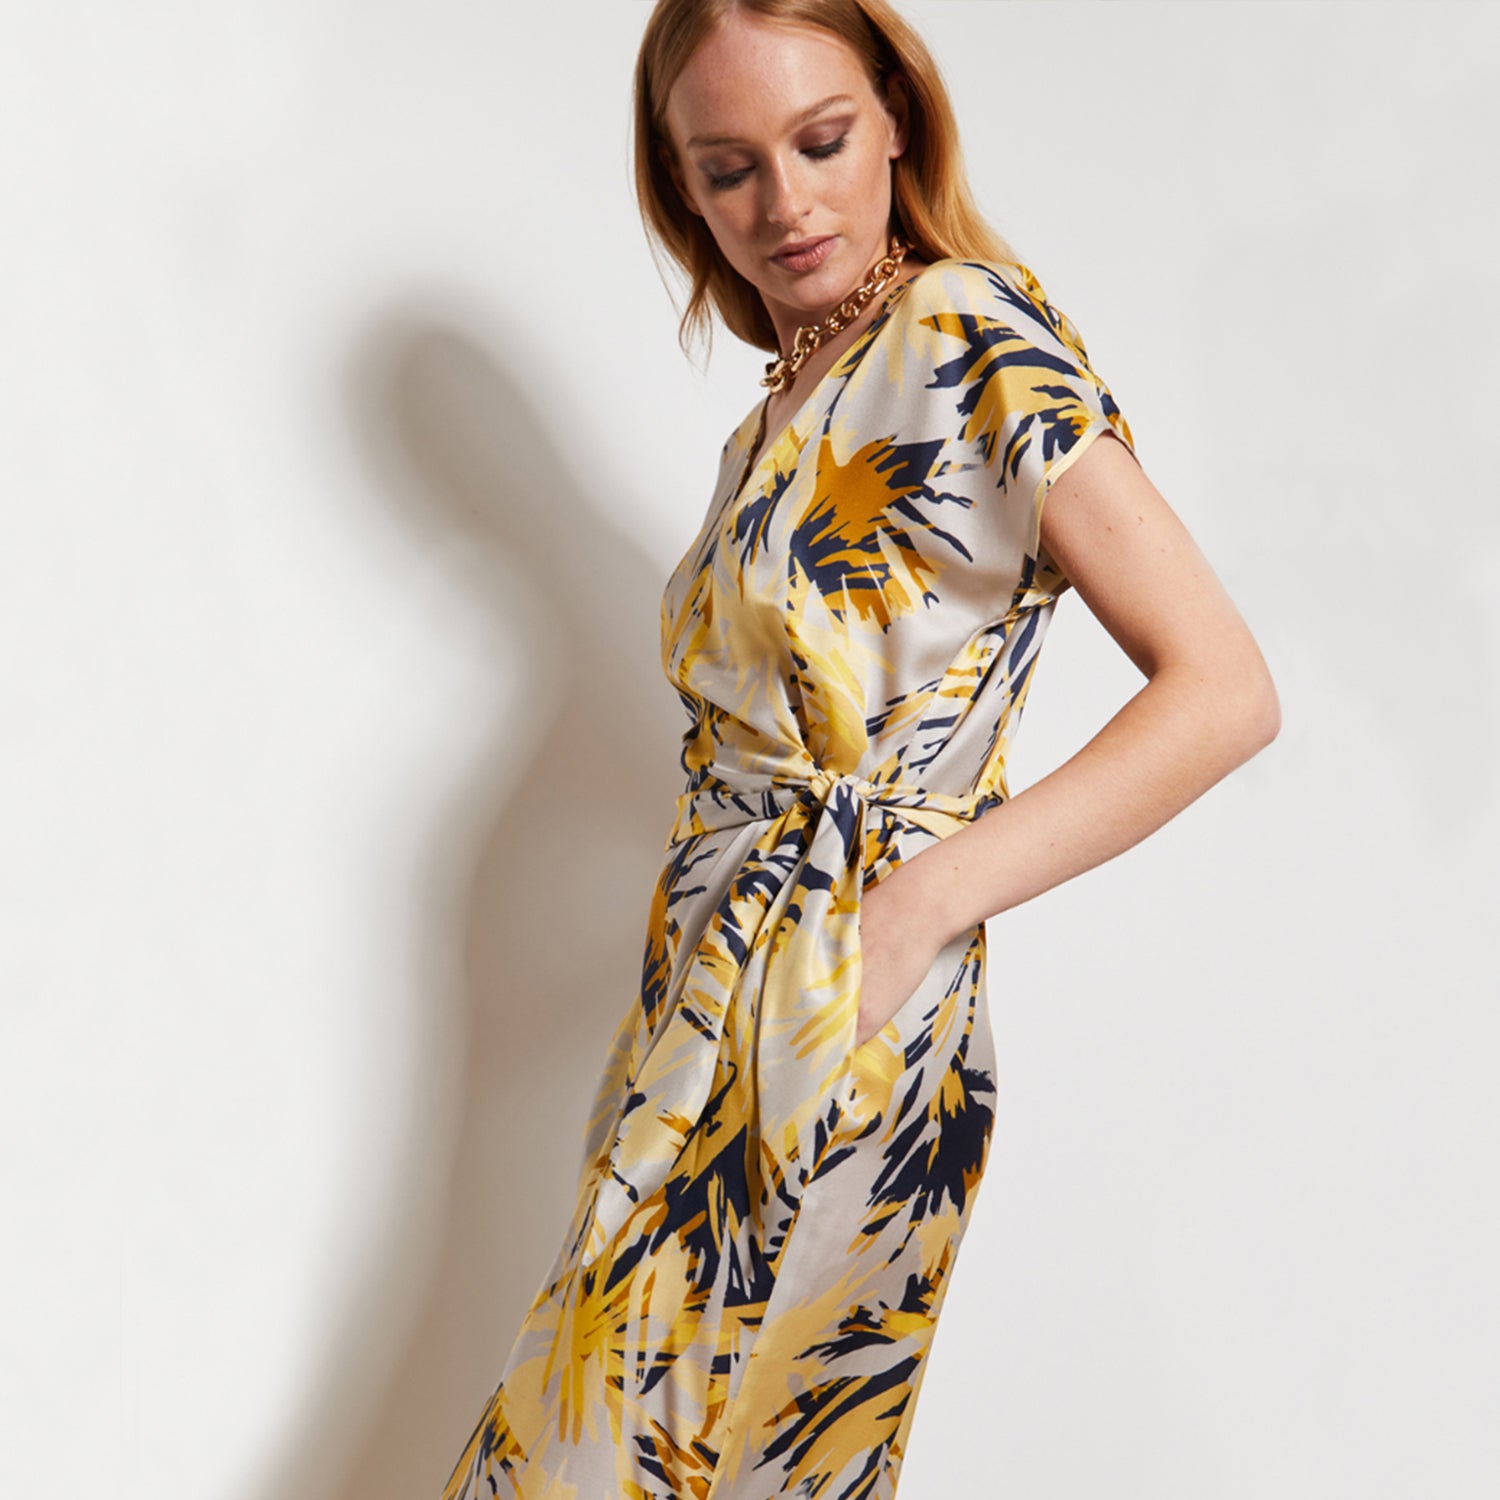 Hoity - Toity yellow and navy print dress by Me&Thee